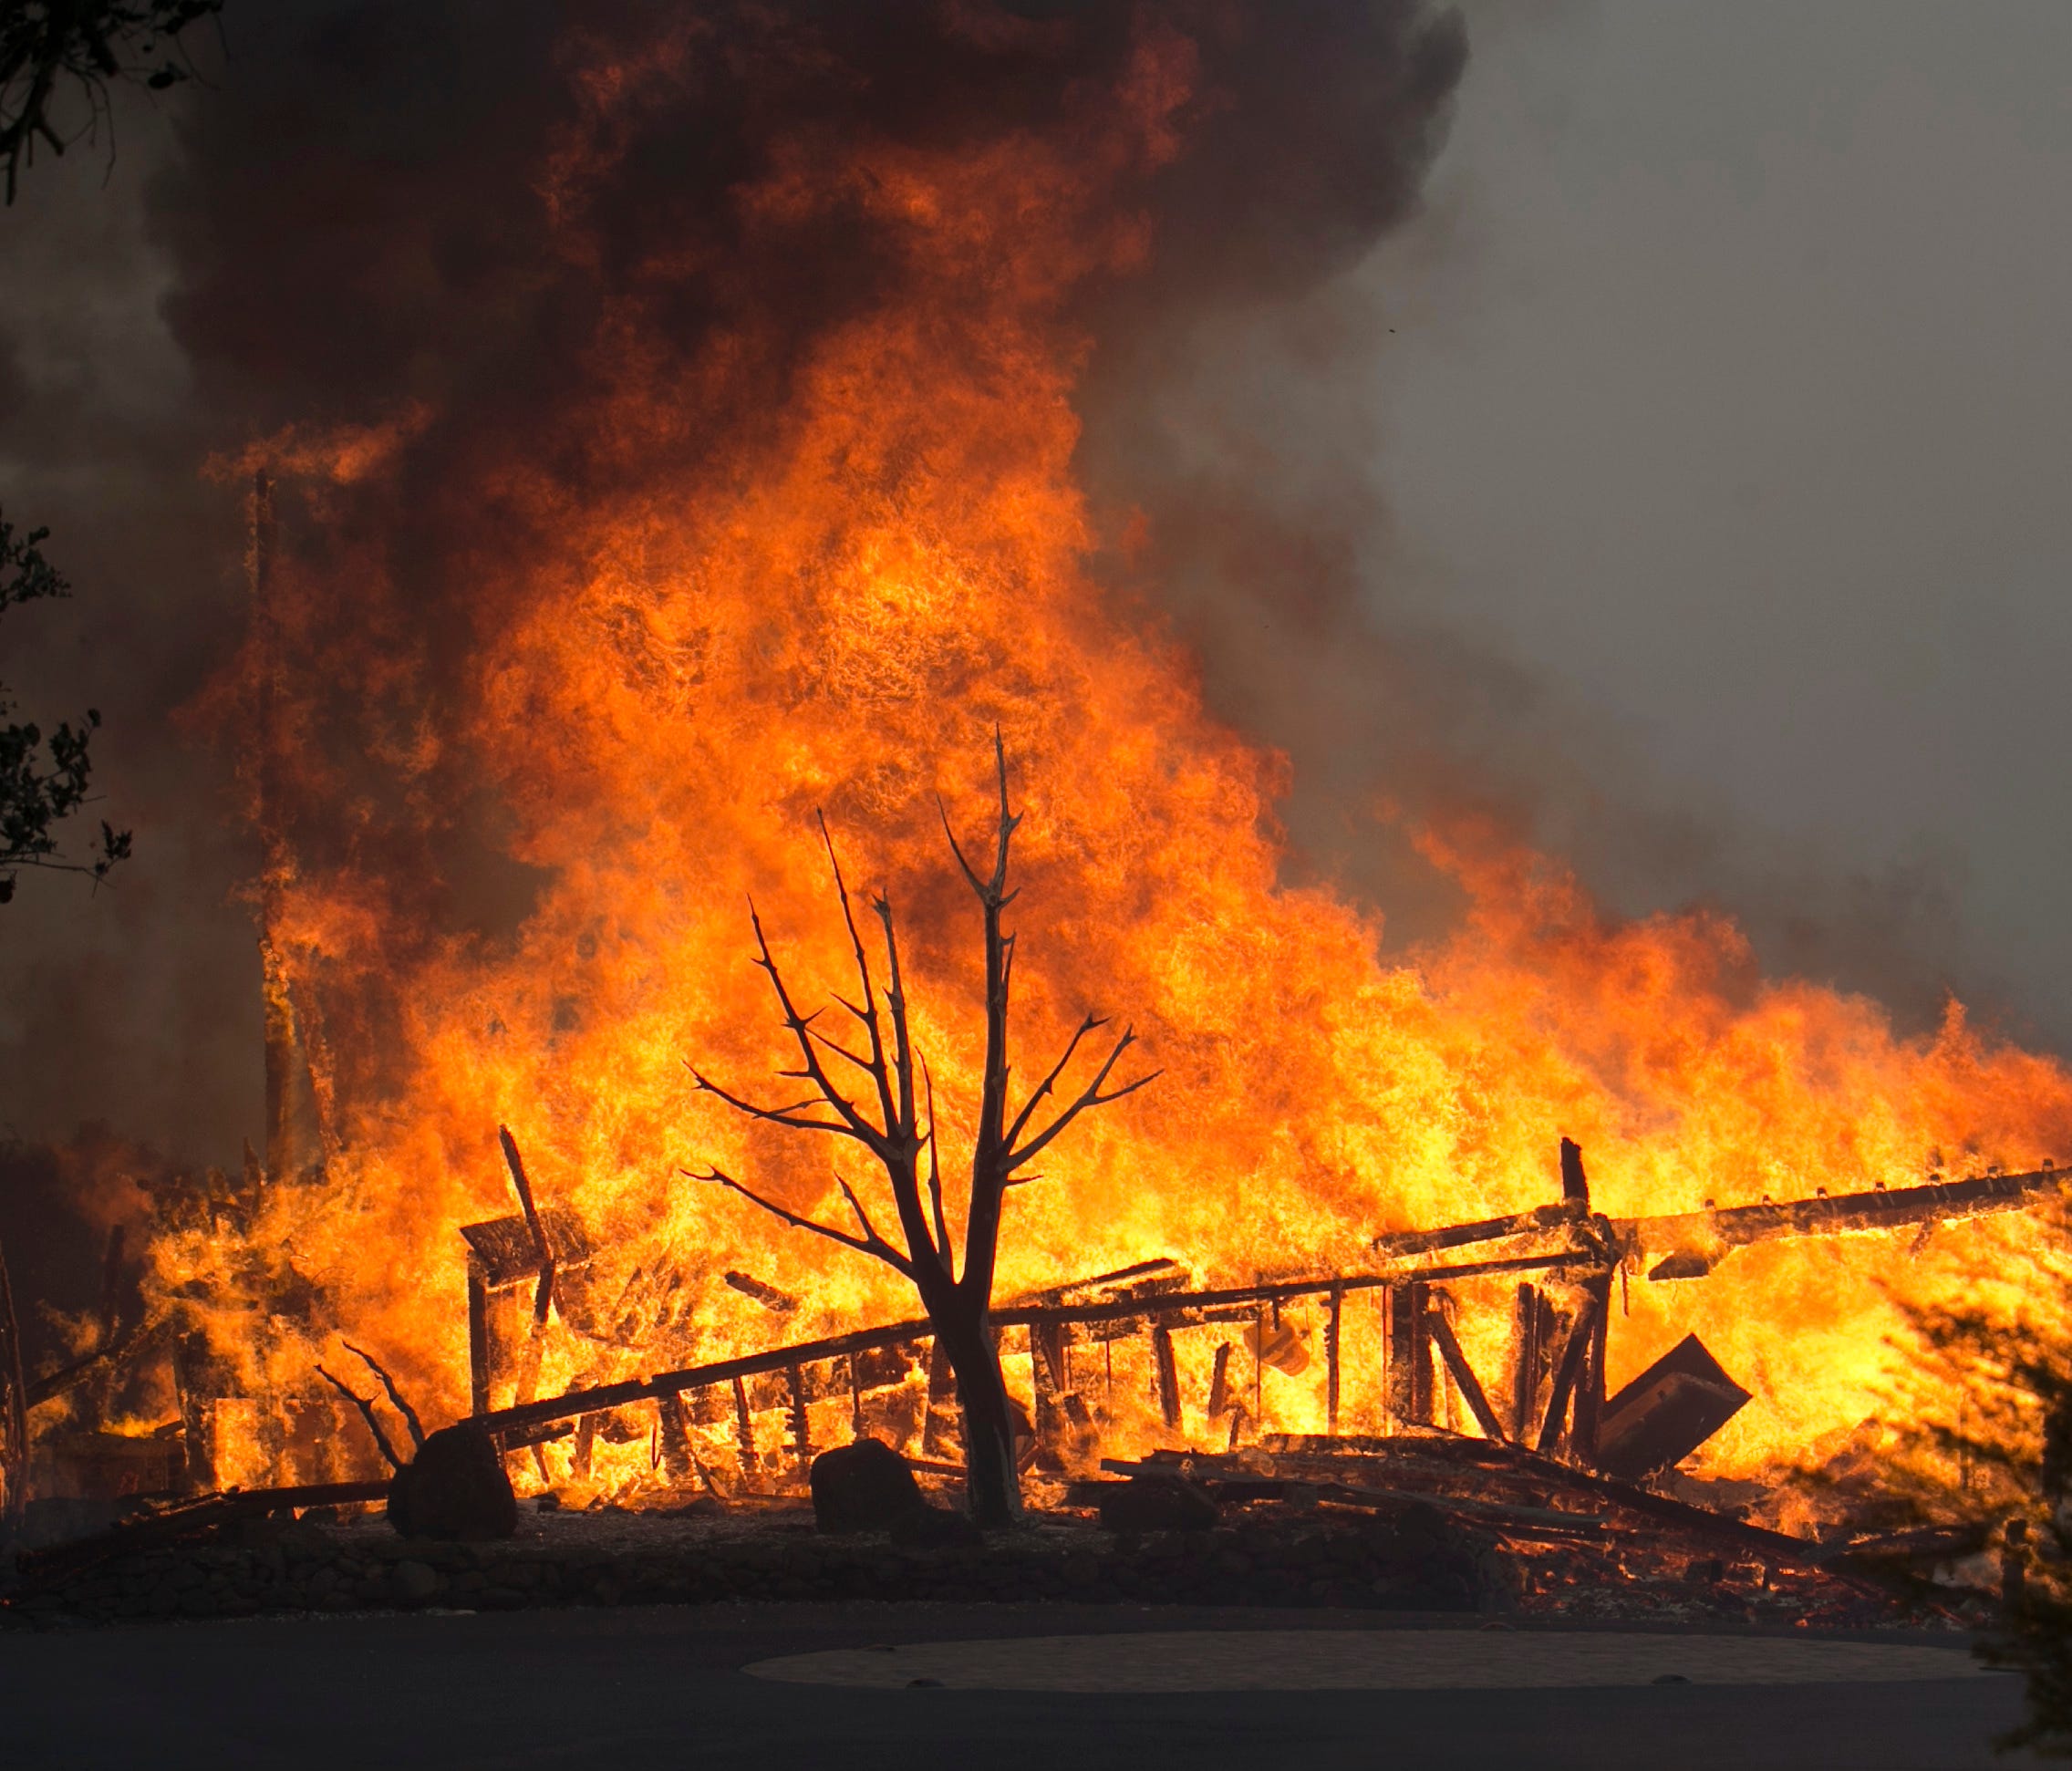 Flames from a wildfire consume a home  east of Napa, Calif., on Oct. 9, 2017.